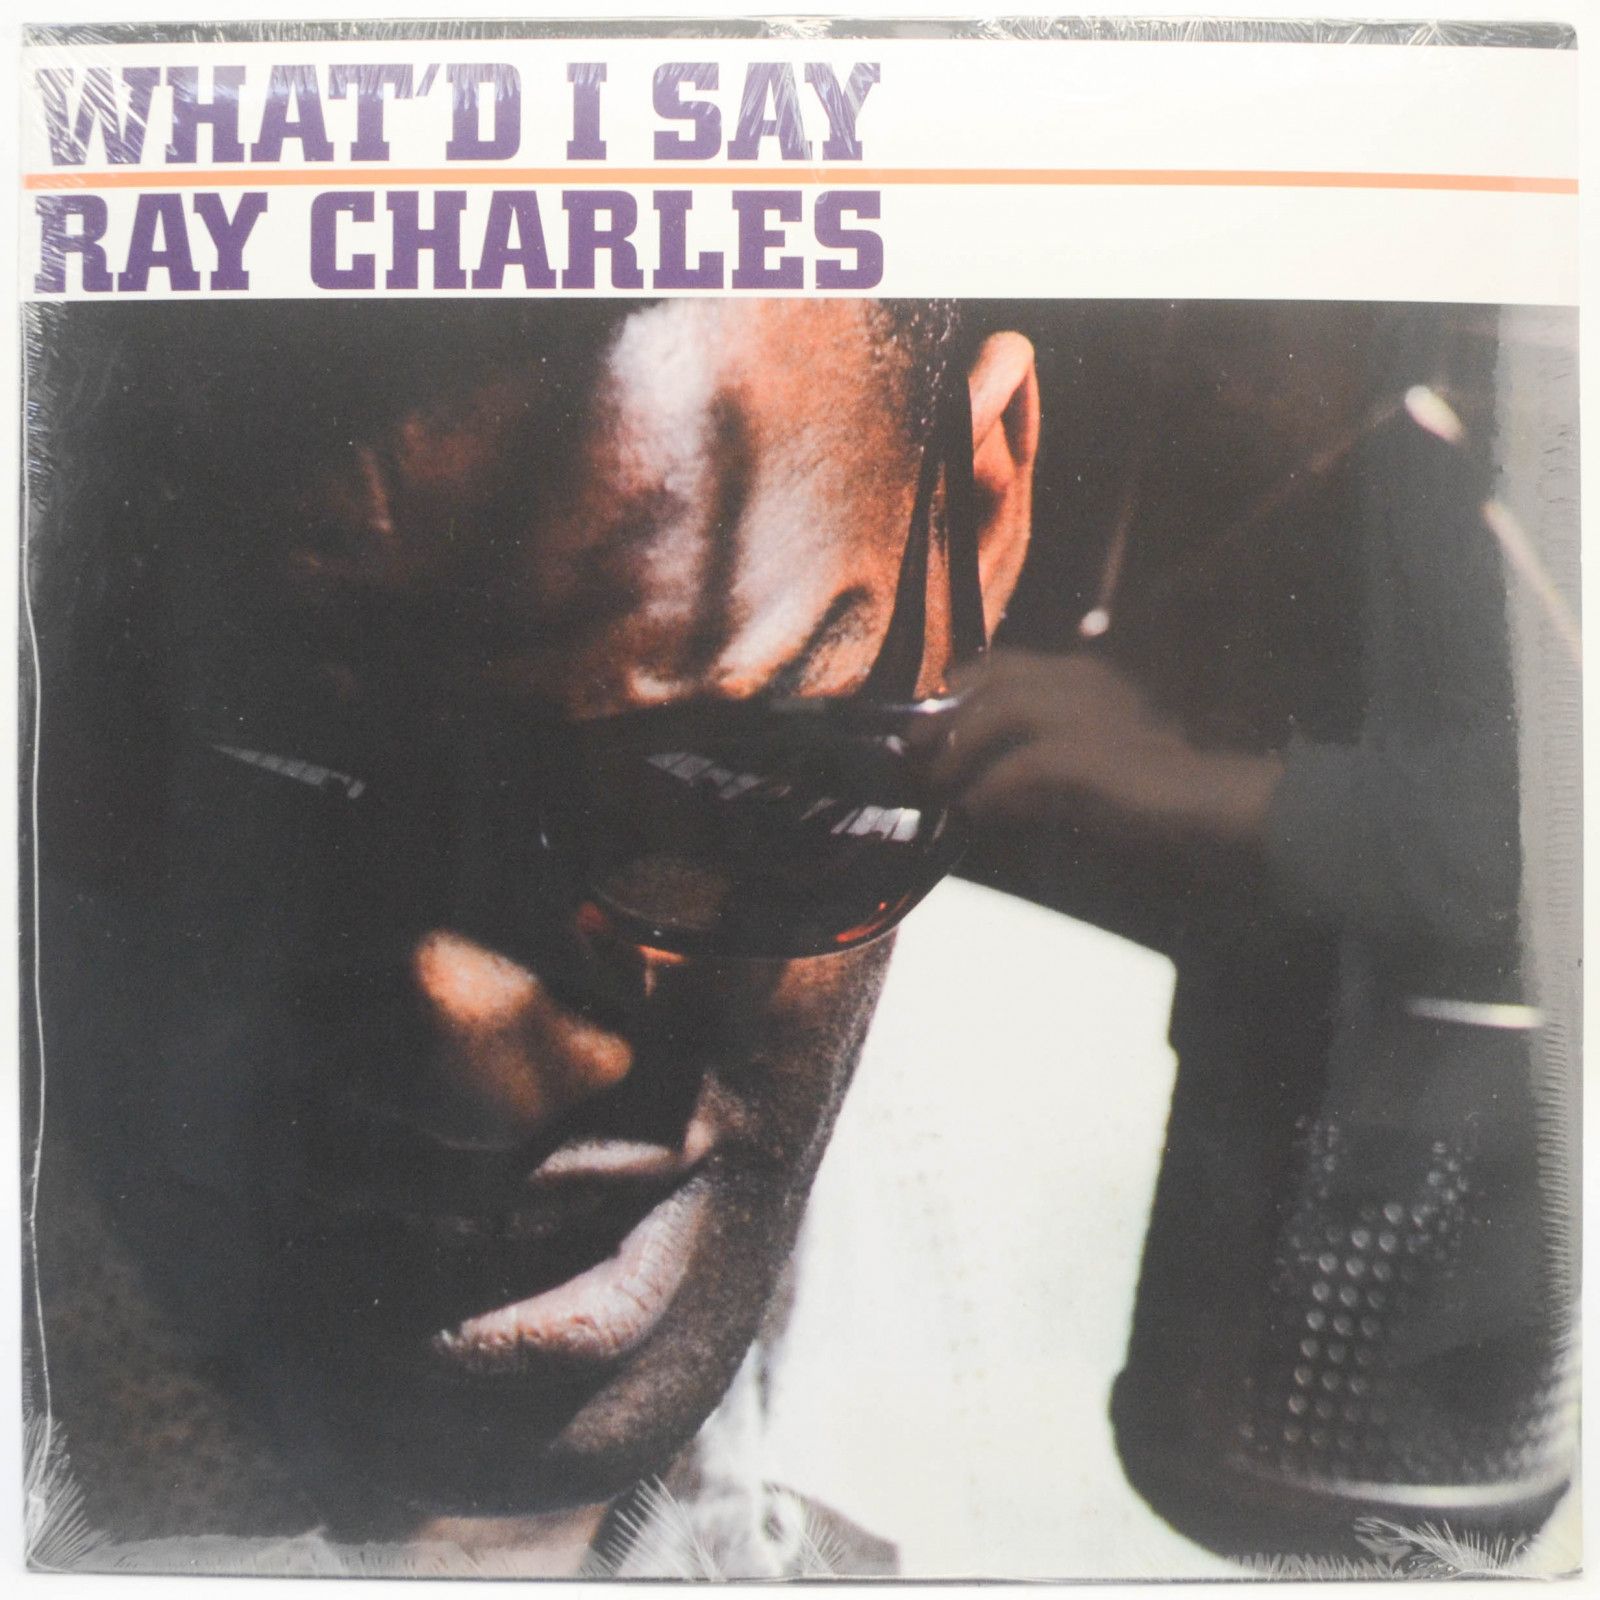 Ray Charles — What'd I Say, 1959